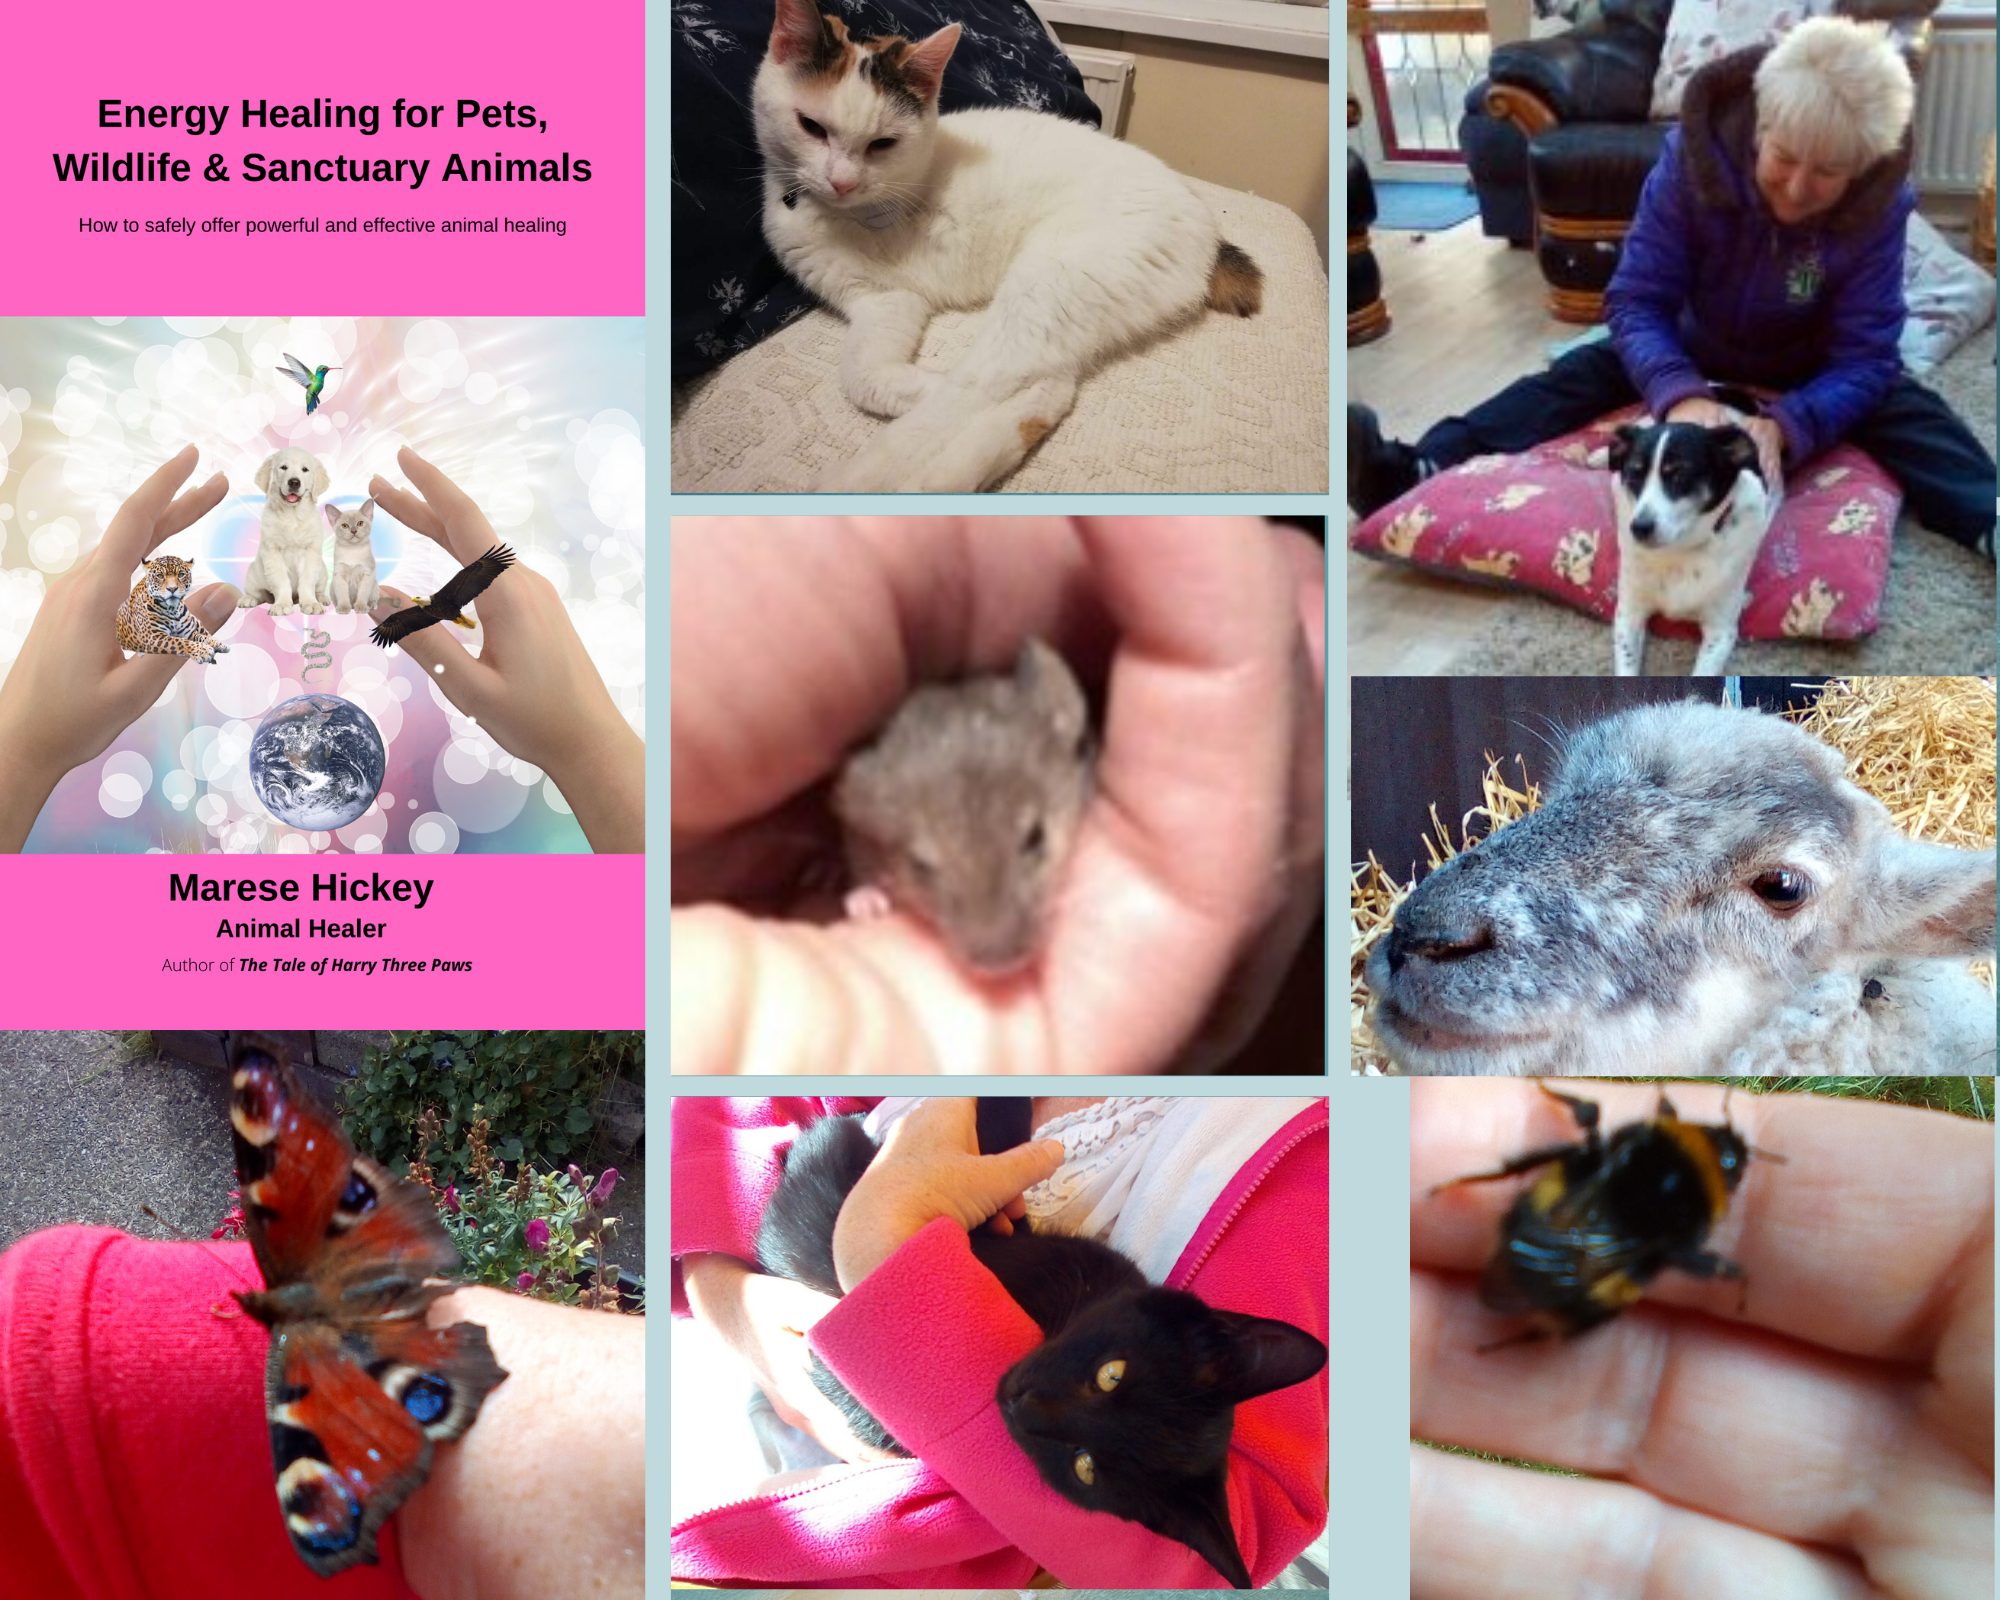 Energy Healing for Pets, Wildlife & Sanctuary Animals – The Write of My Life